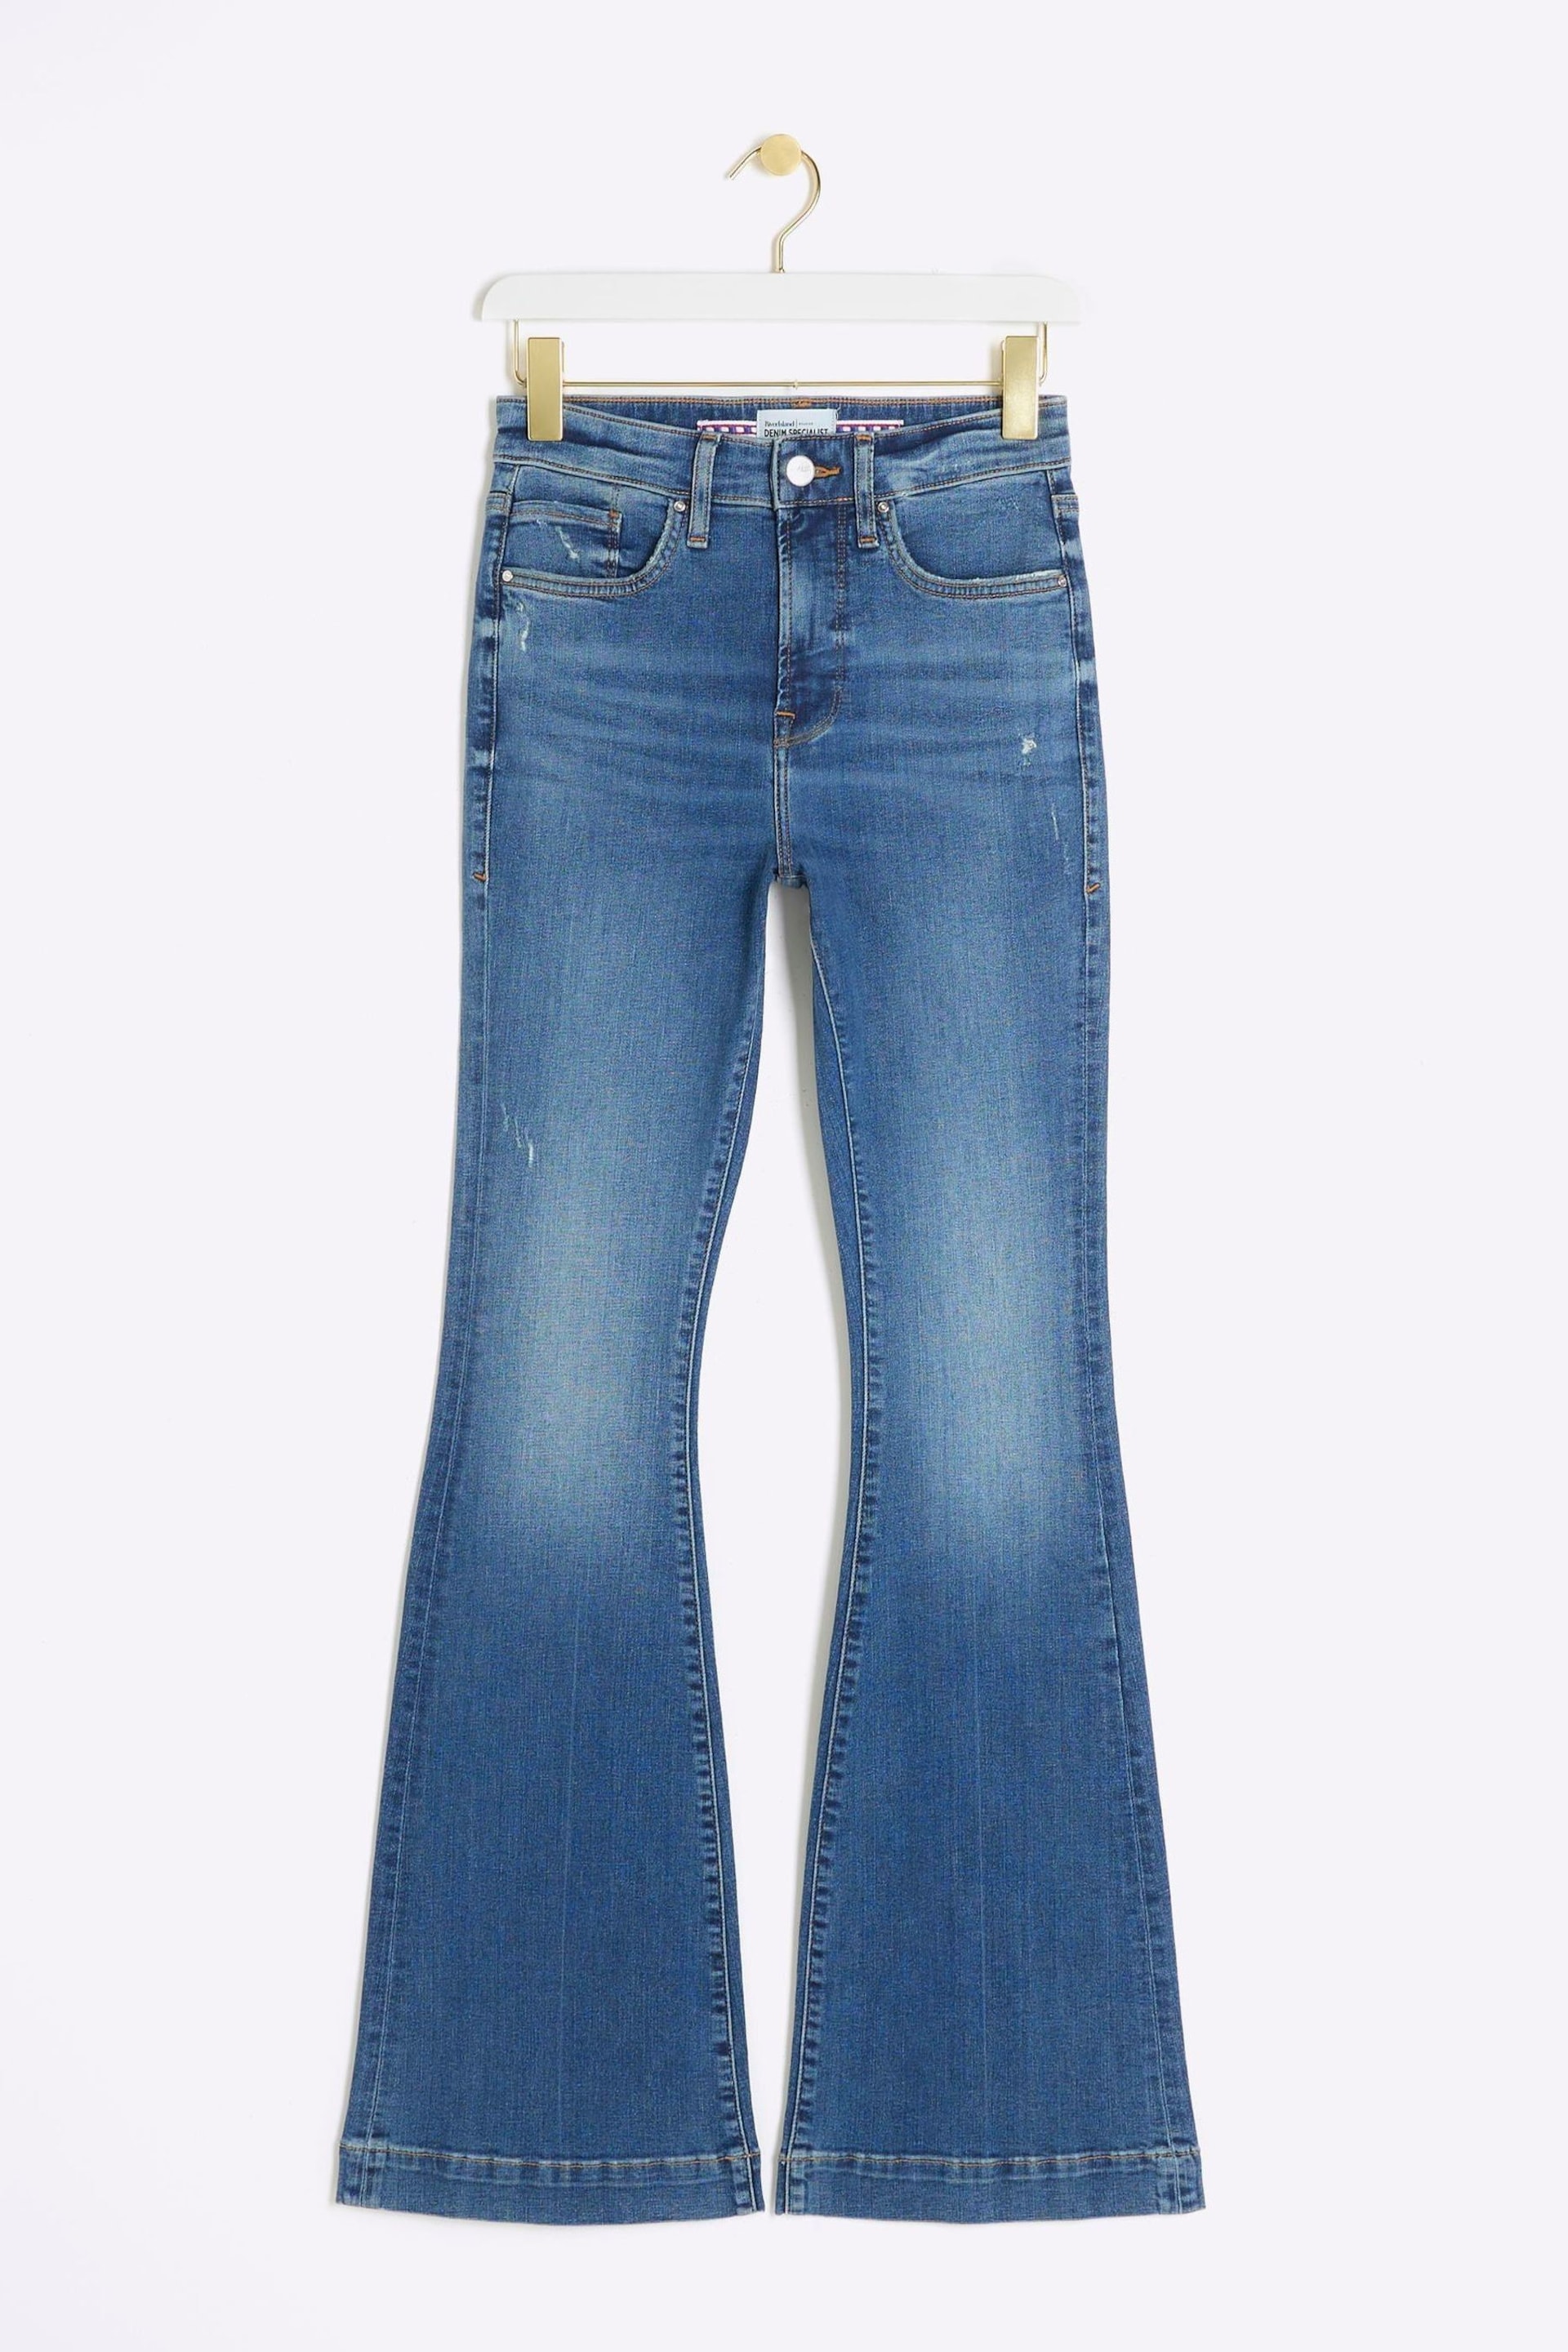 River Island Blue High Rise Tummy Hold Flare Jeans - Image 5 of 5